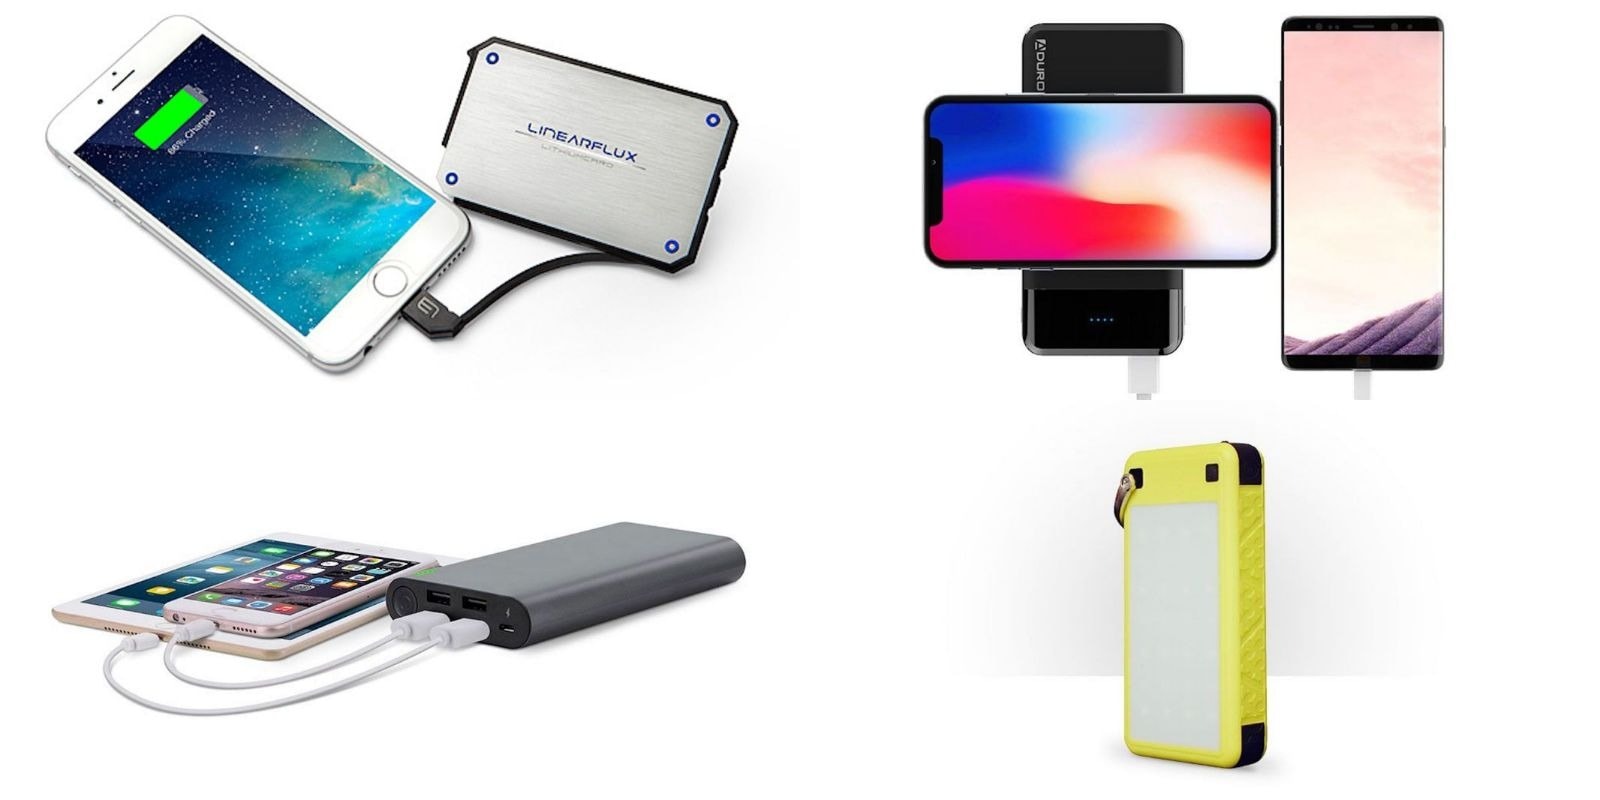 We've rounded up some of the best deals on portable power packs, in time for Black Friday holiday shopping.